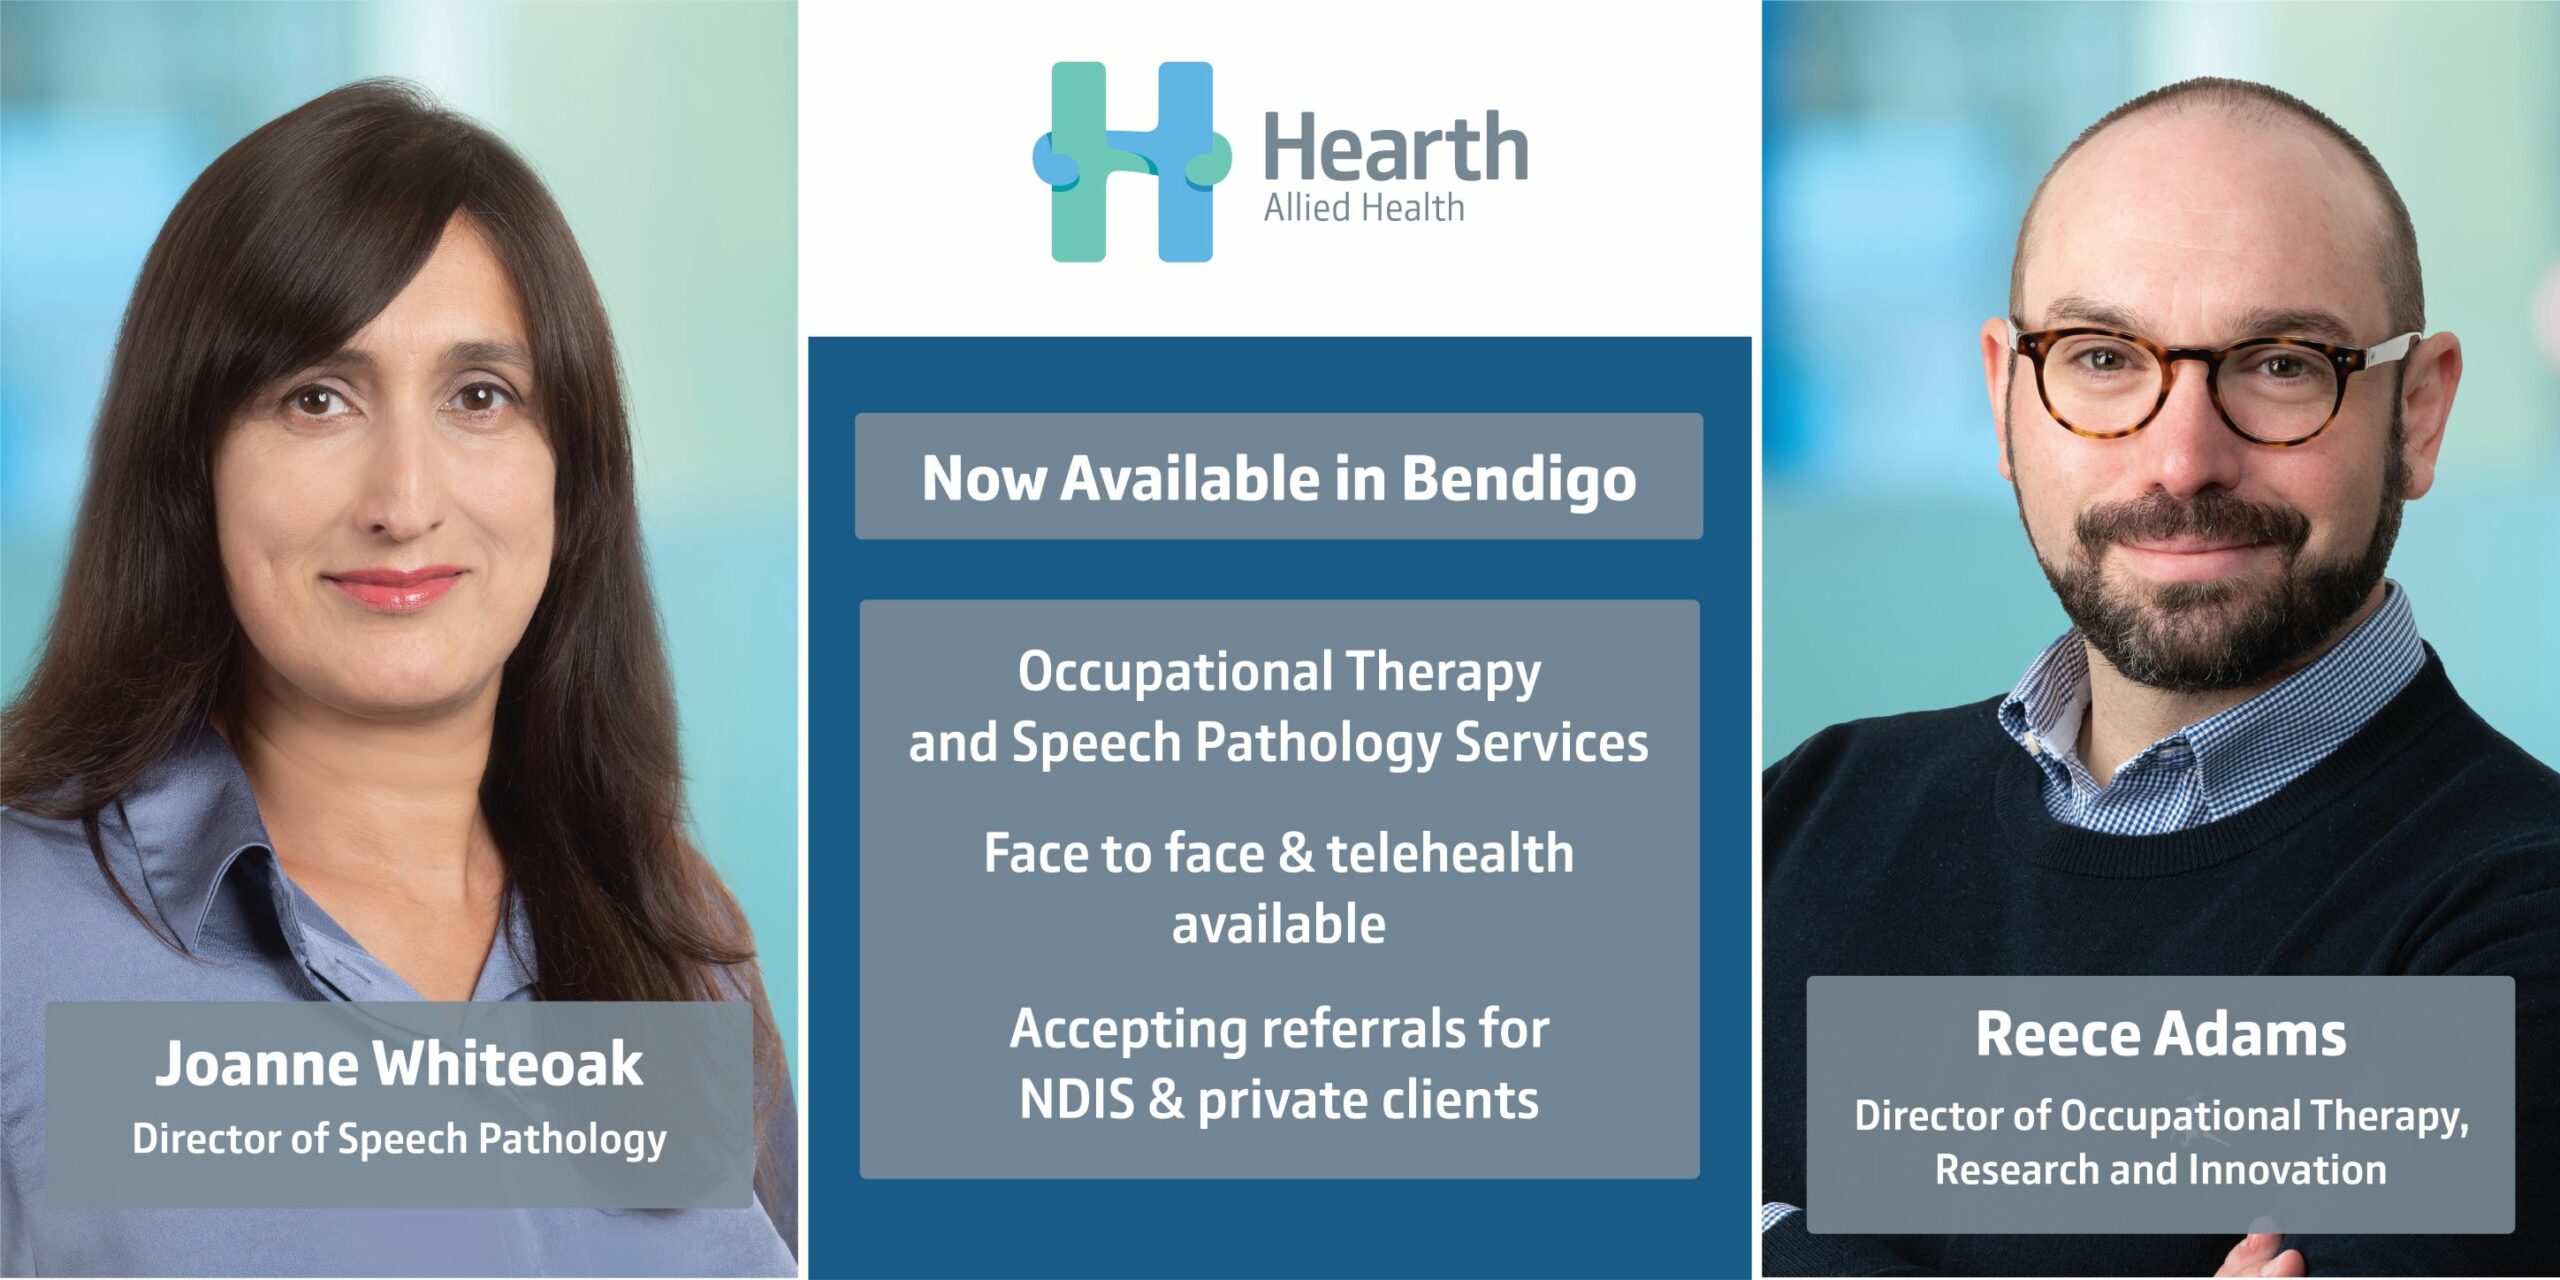 Now Available in Bendigo – Hearth Occupational Therapy and Speech Pathology Services